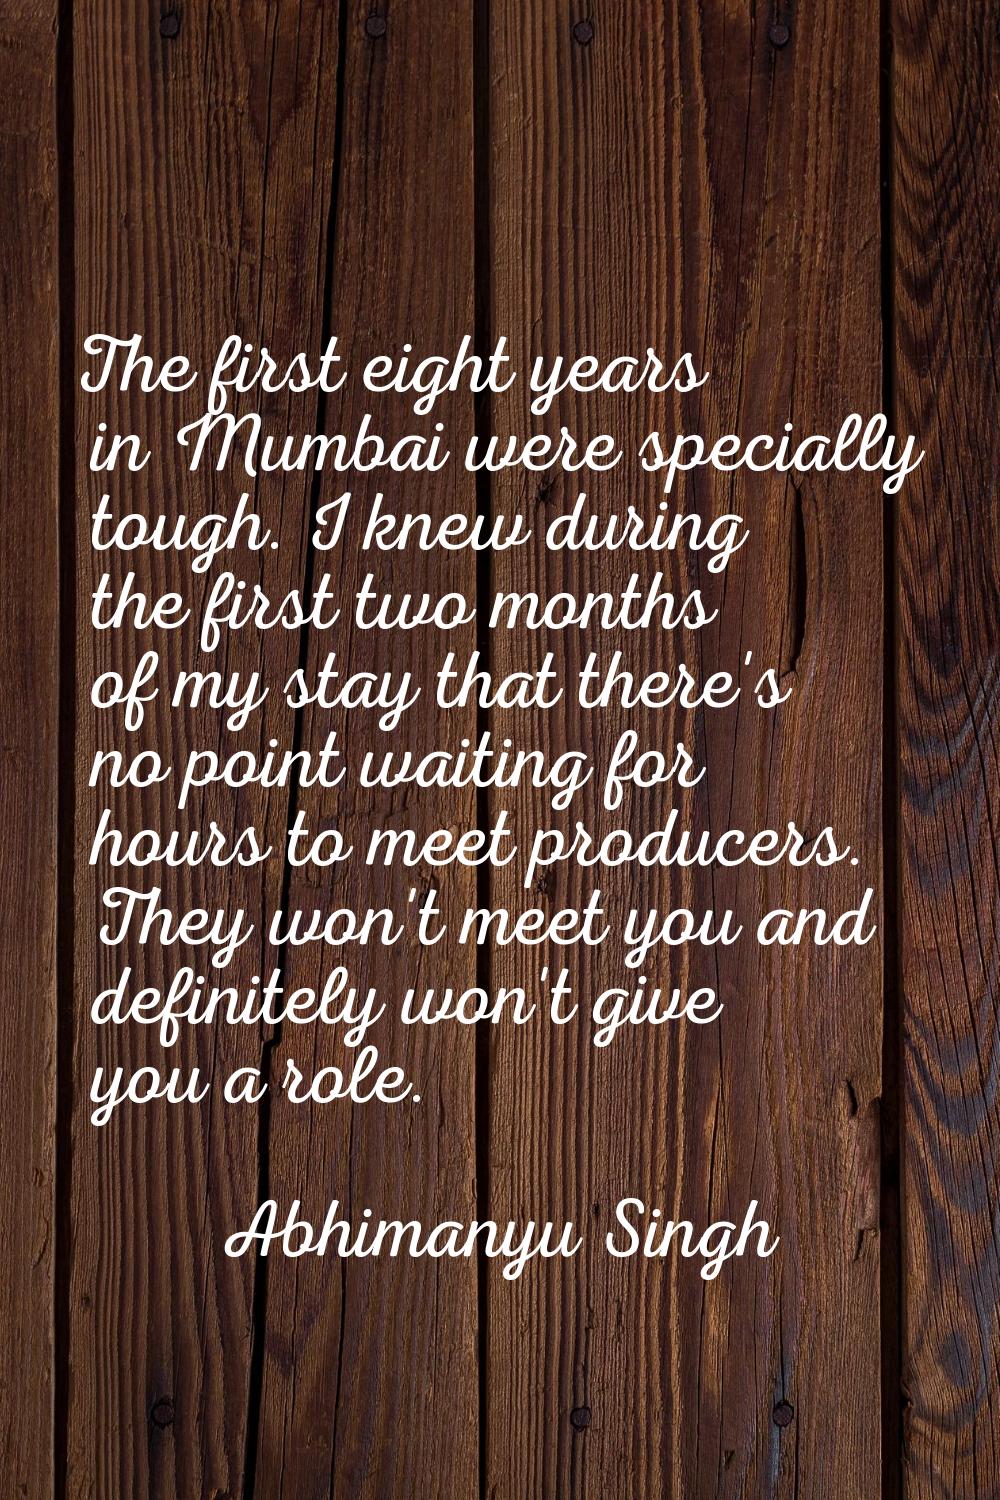 The first eight years in Mumbai were specially tough. I knew during the first two months of my stay